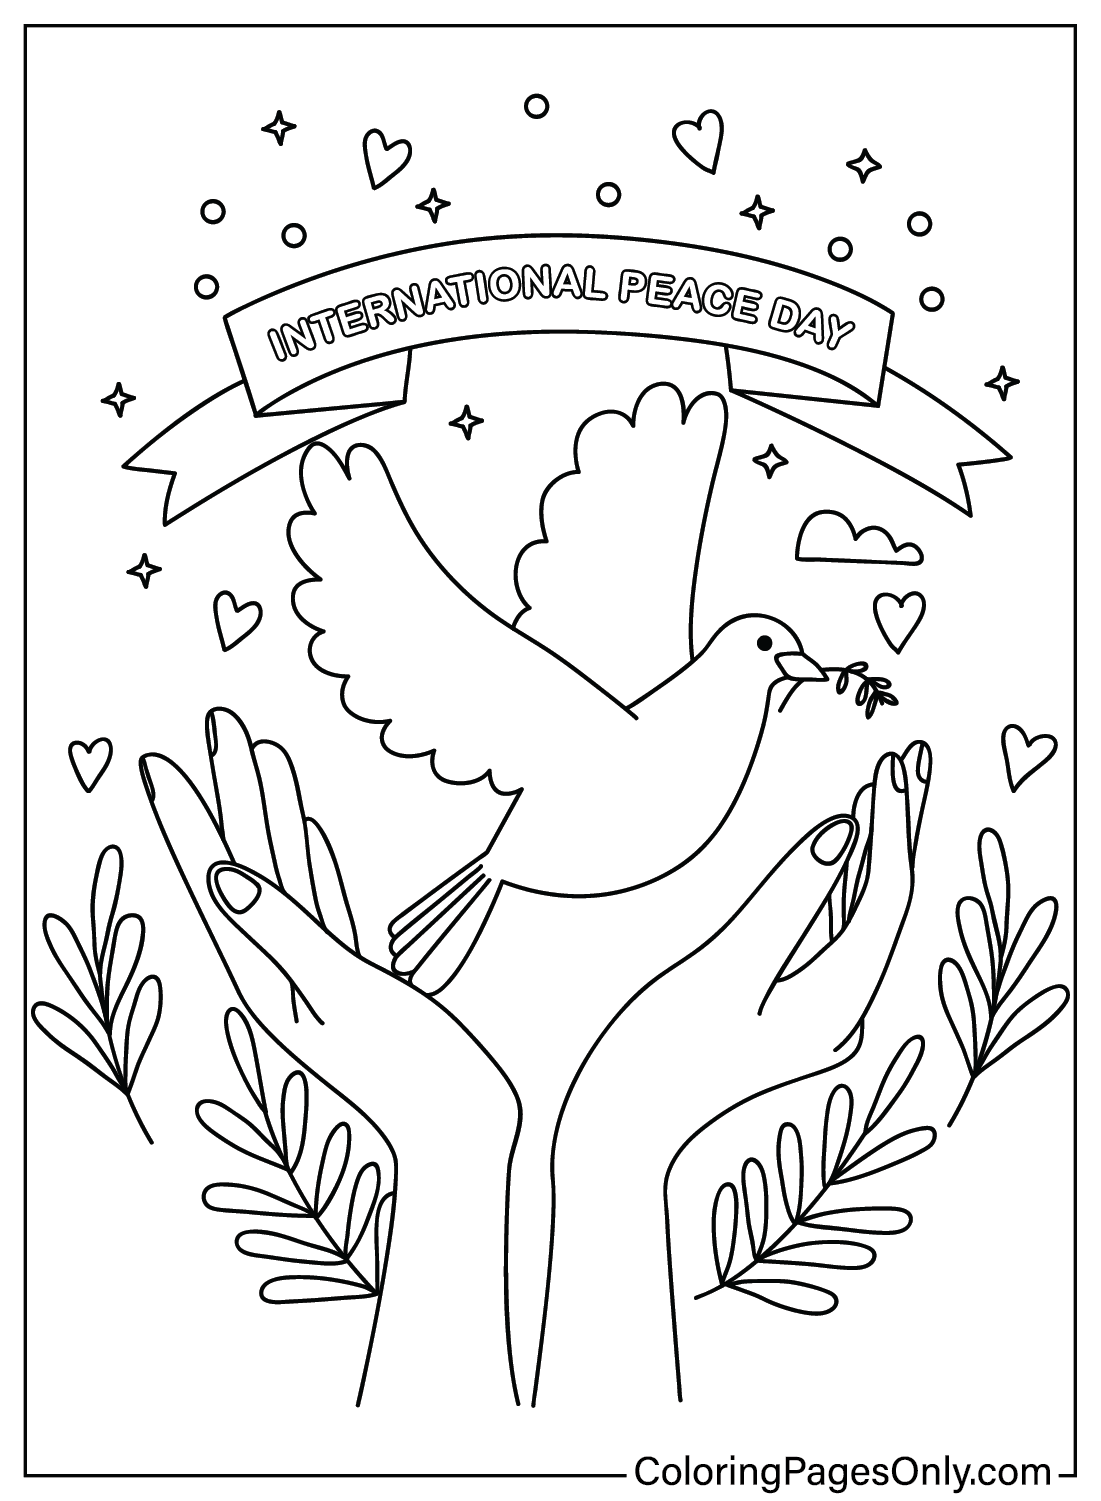 International Day of Peace Coloring Page